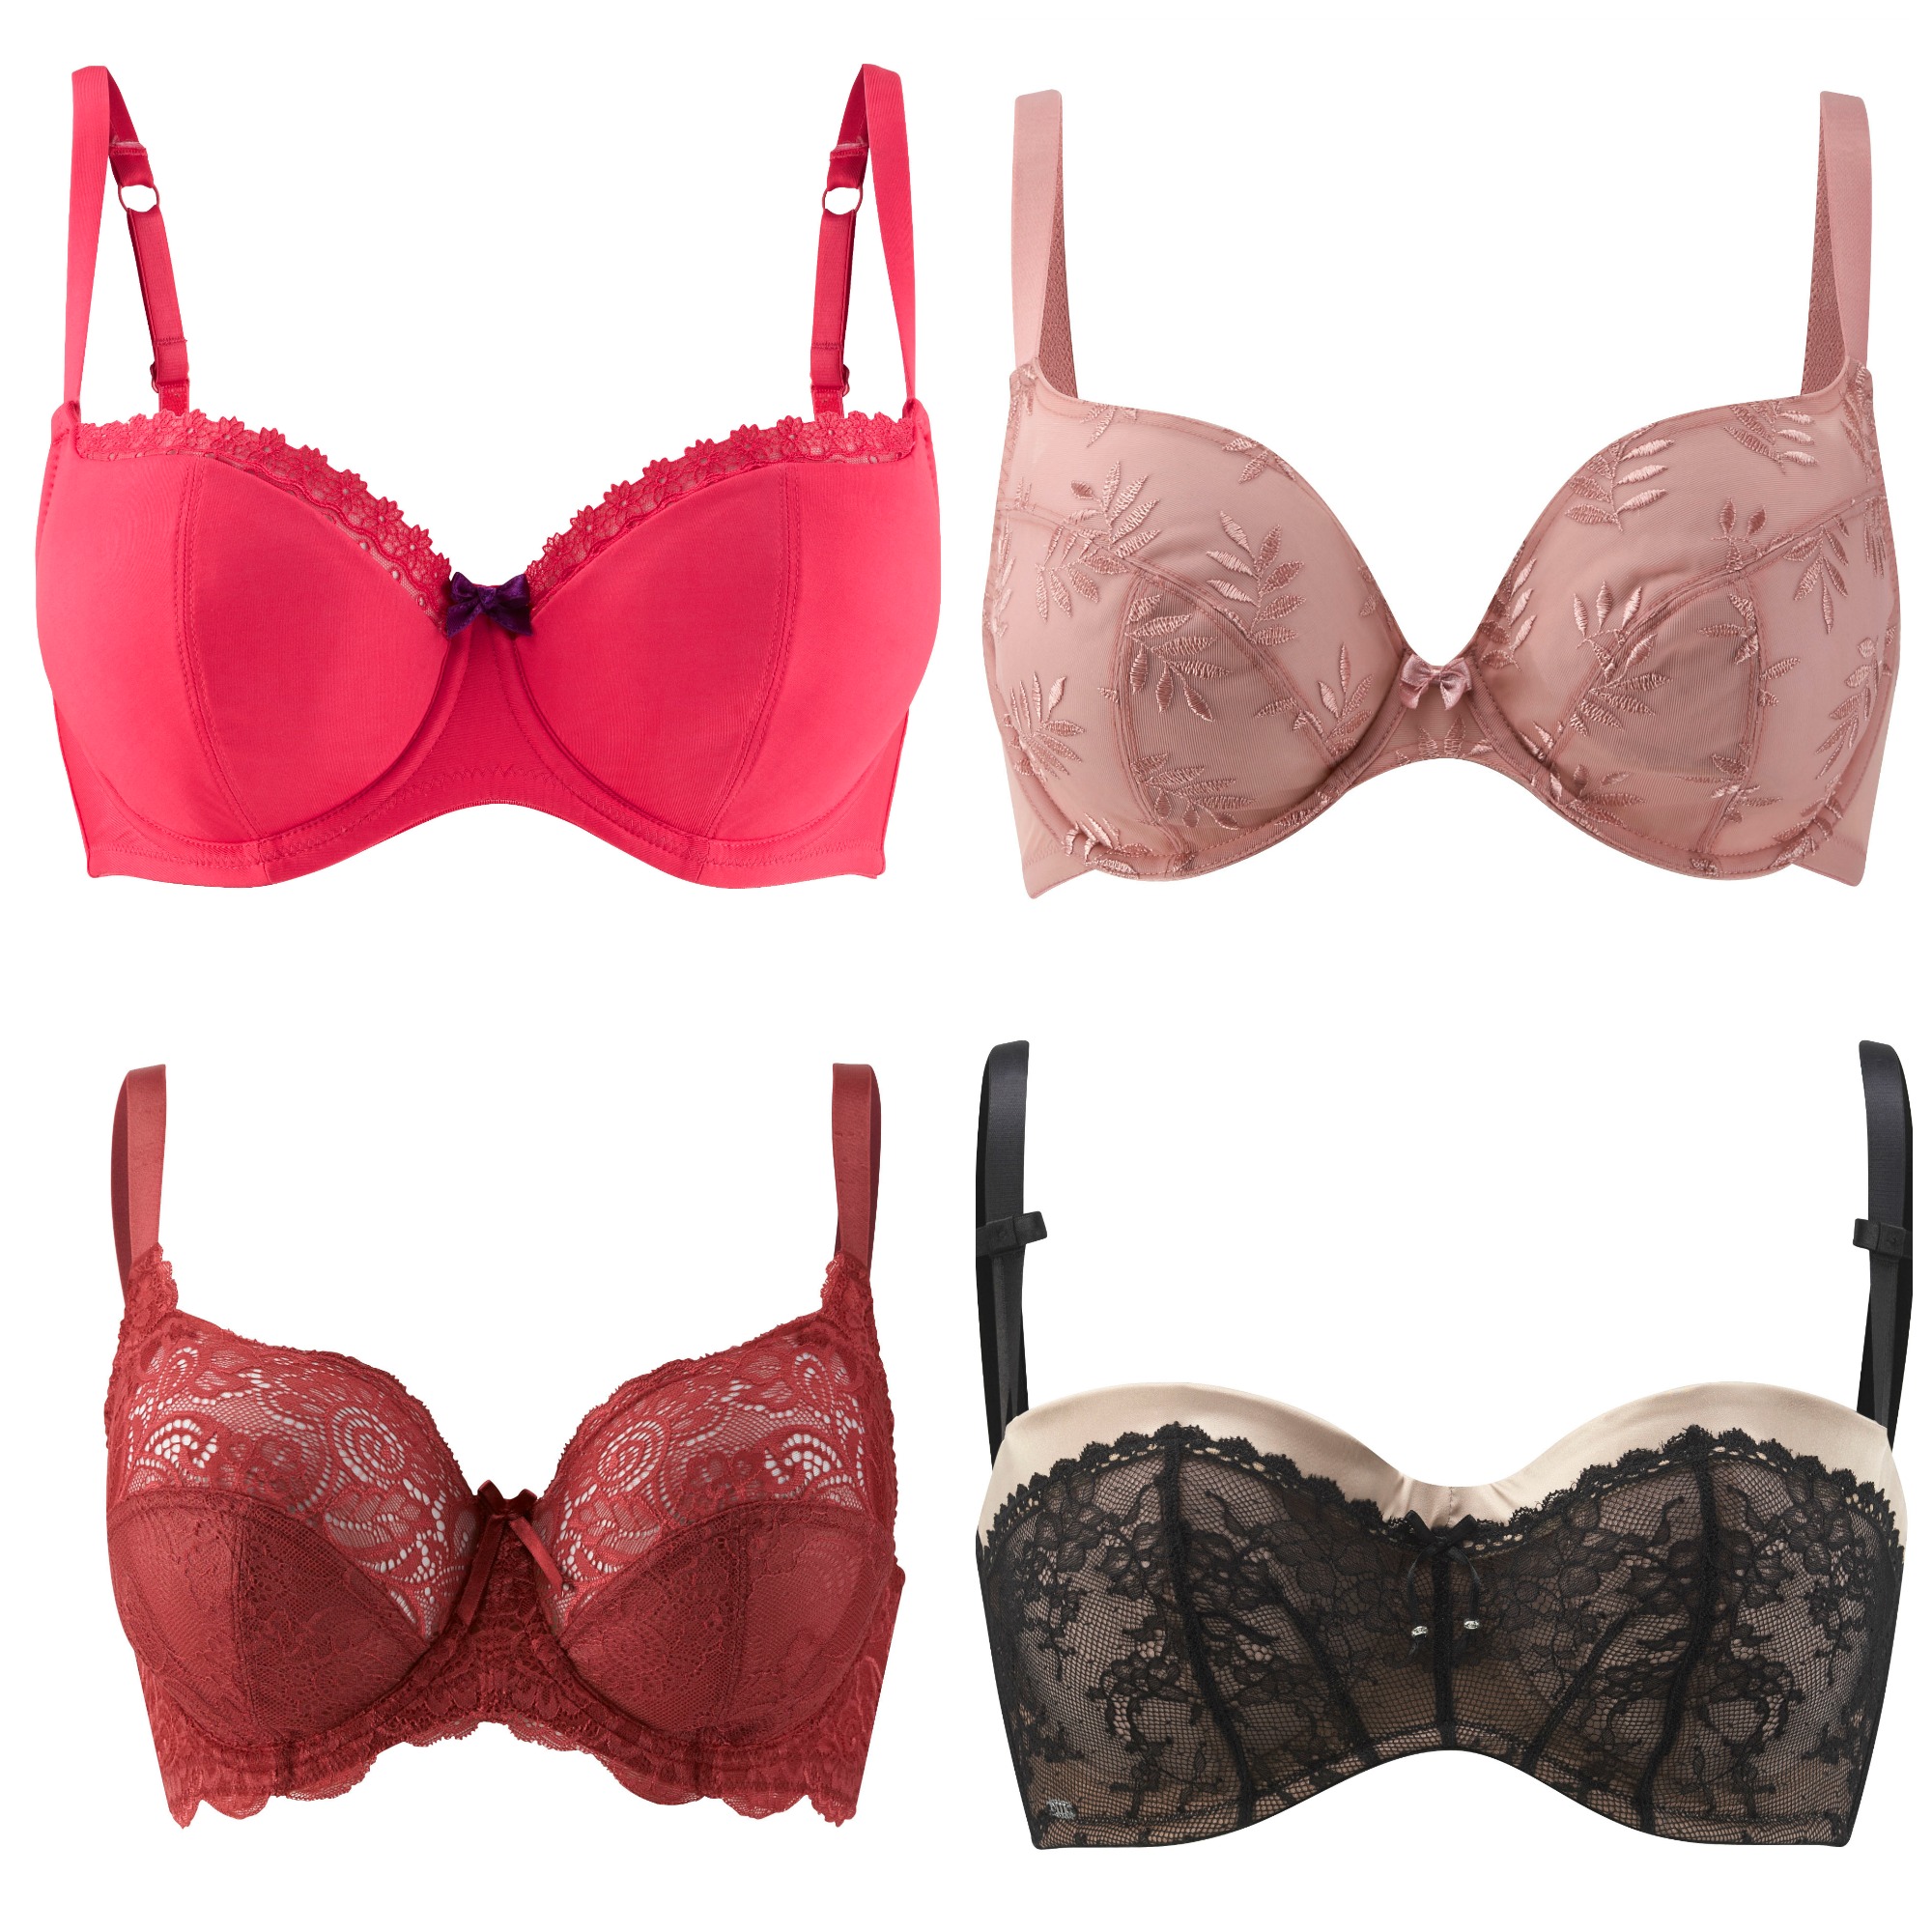 On Breasts, Bras, and Why I Hate Victoria's Secret (Part 2)